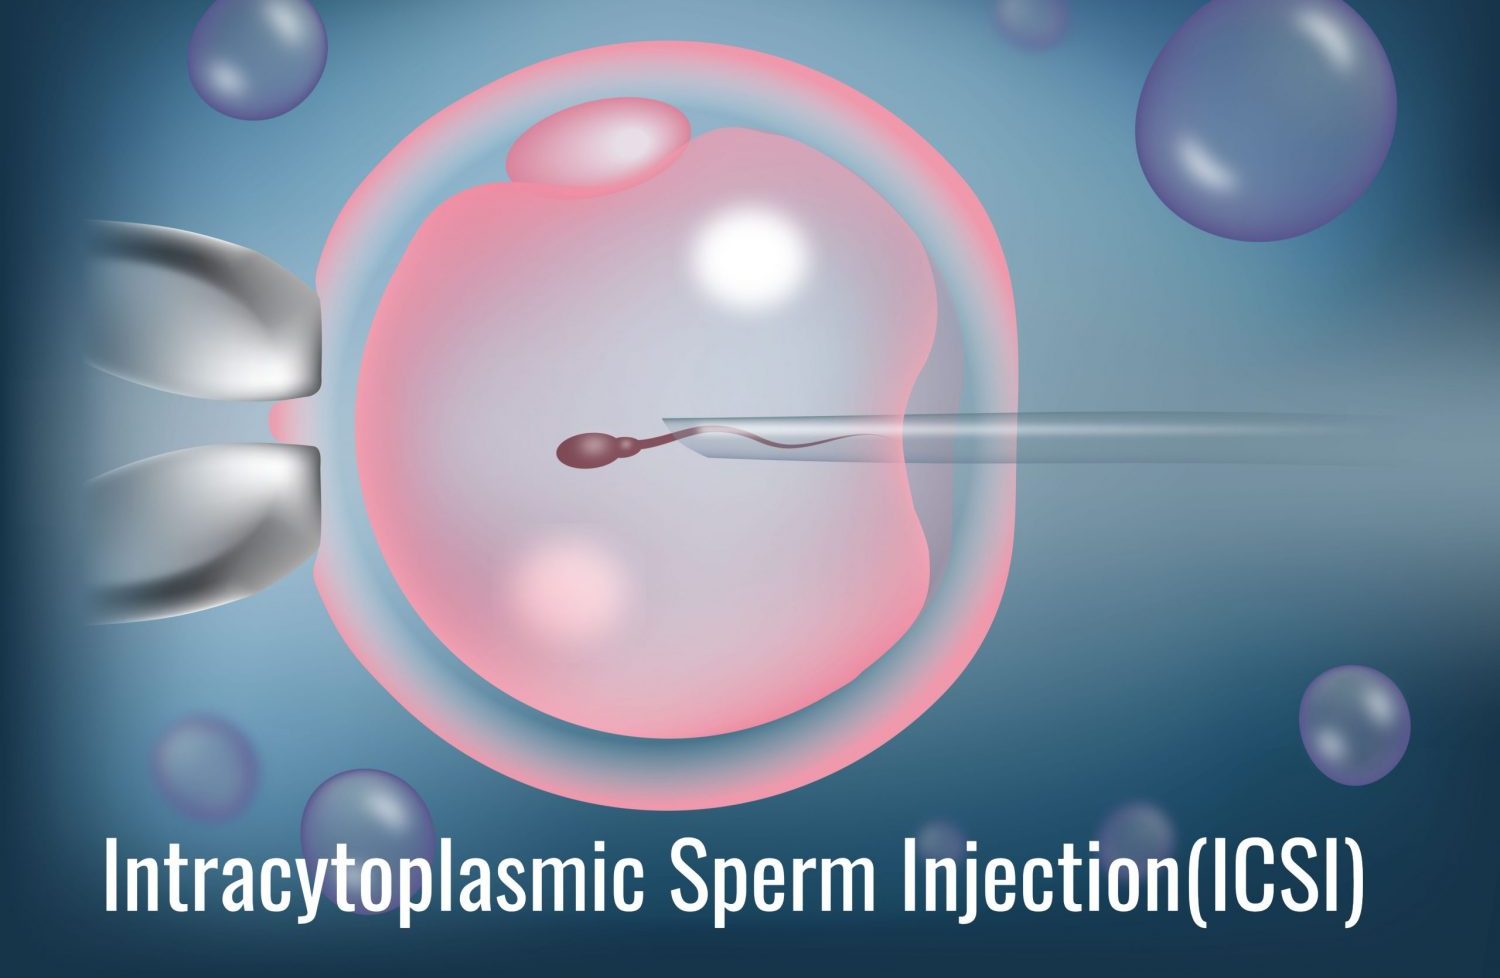 What is Intracytoplasmic Sperm Injection?